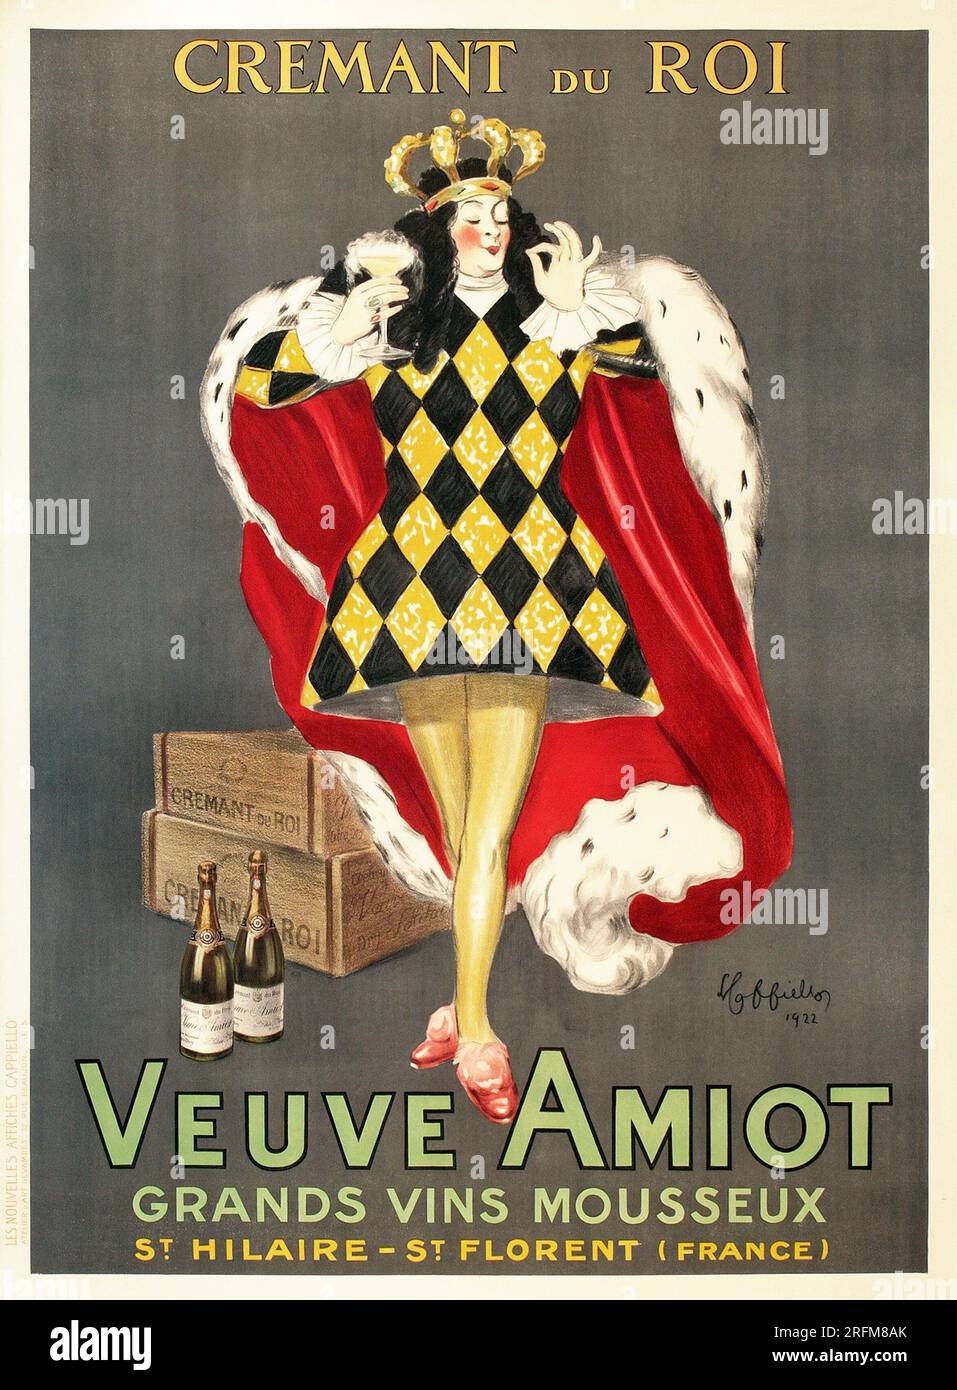 Veuve Amiot - Vintage Poster by Leonetto Cappiello - Champagne King, 1922 Stock Photo